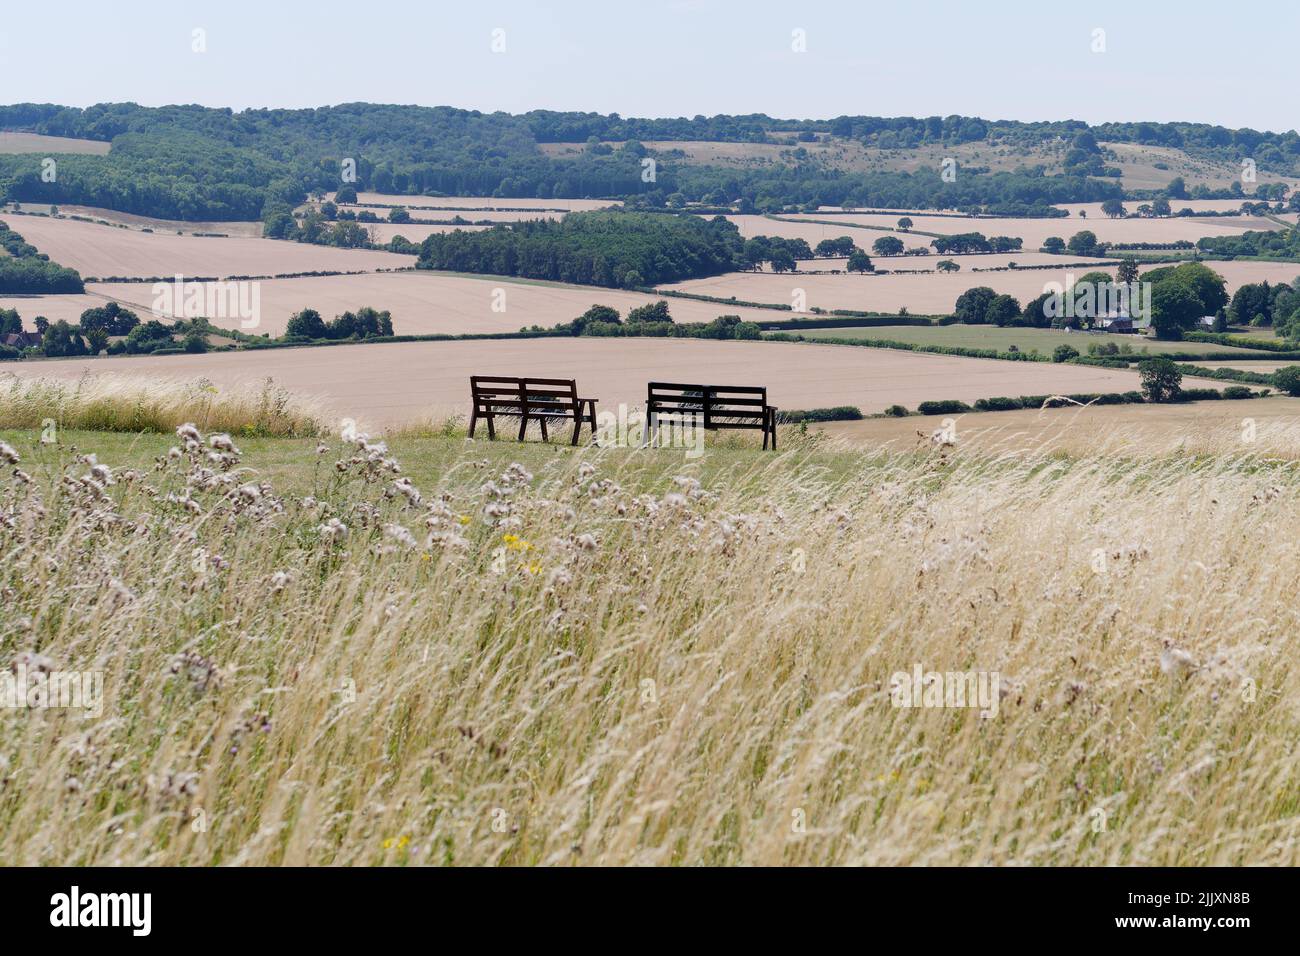 Countryside view of Whipsnade near Dunstable in Bedfordshire, England. Long grass in the foreground and benches centre. Stock Photo